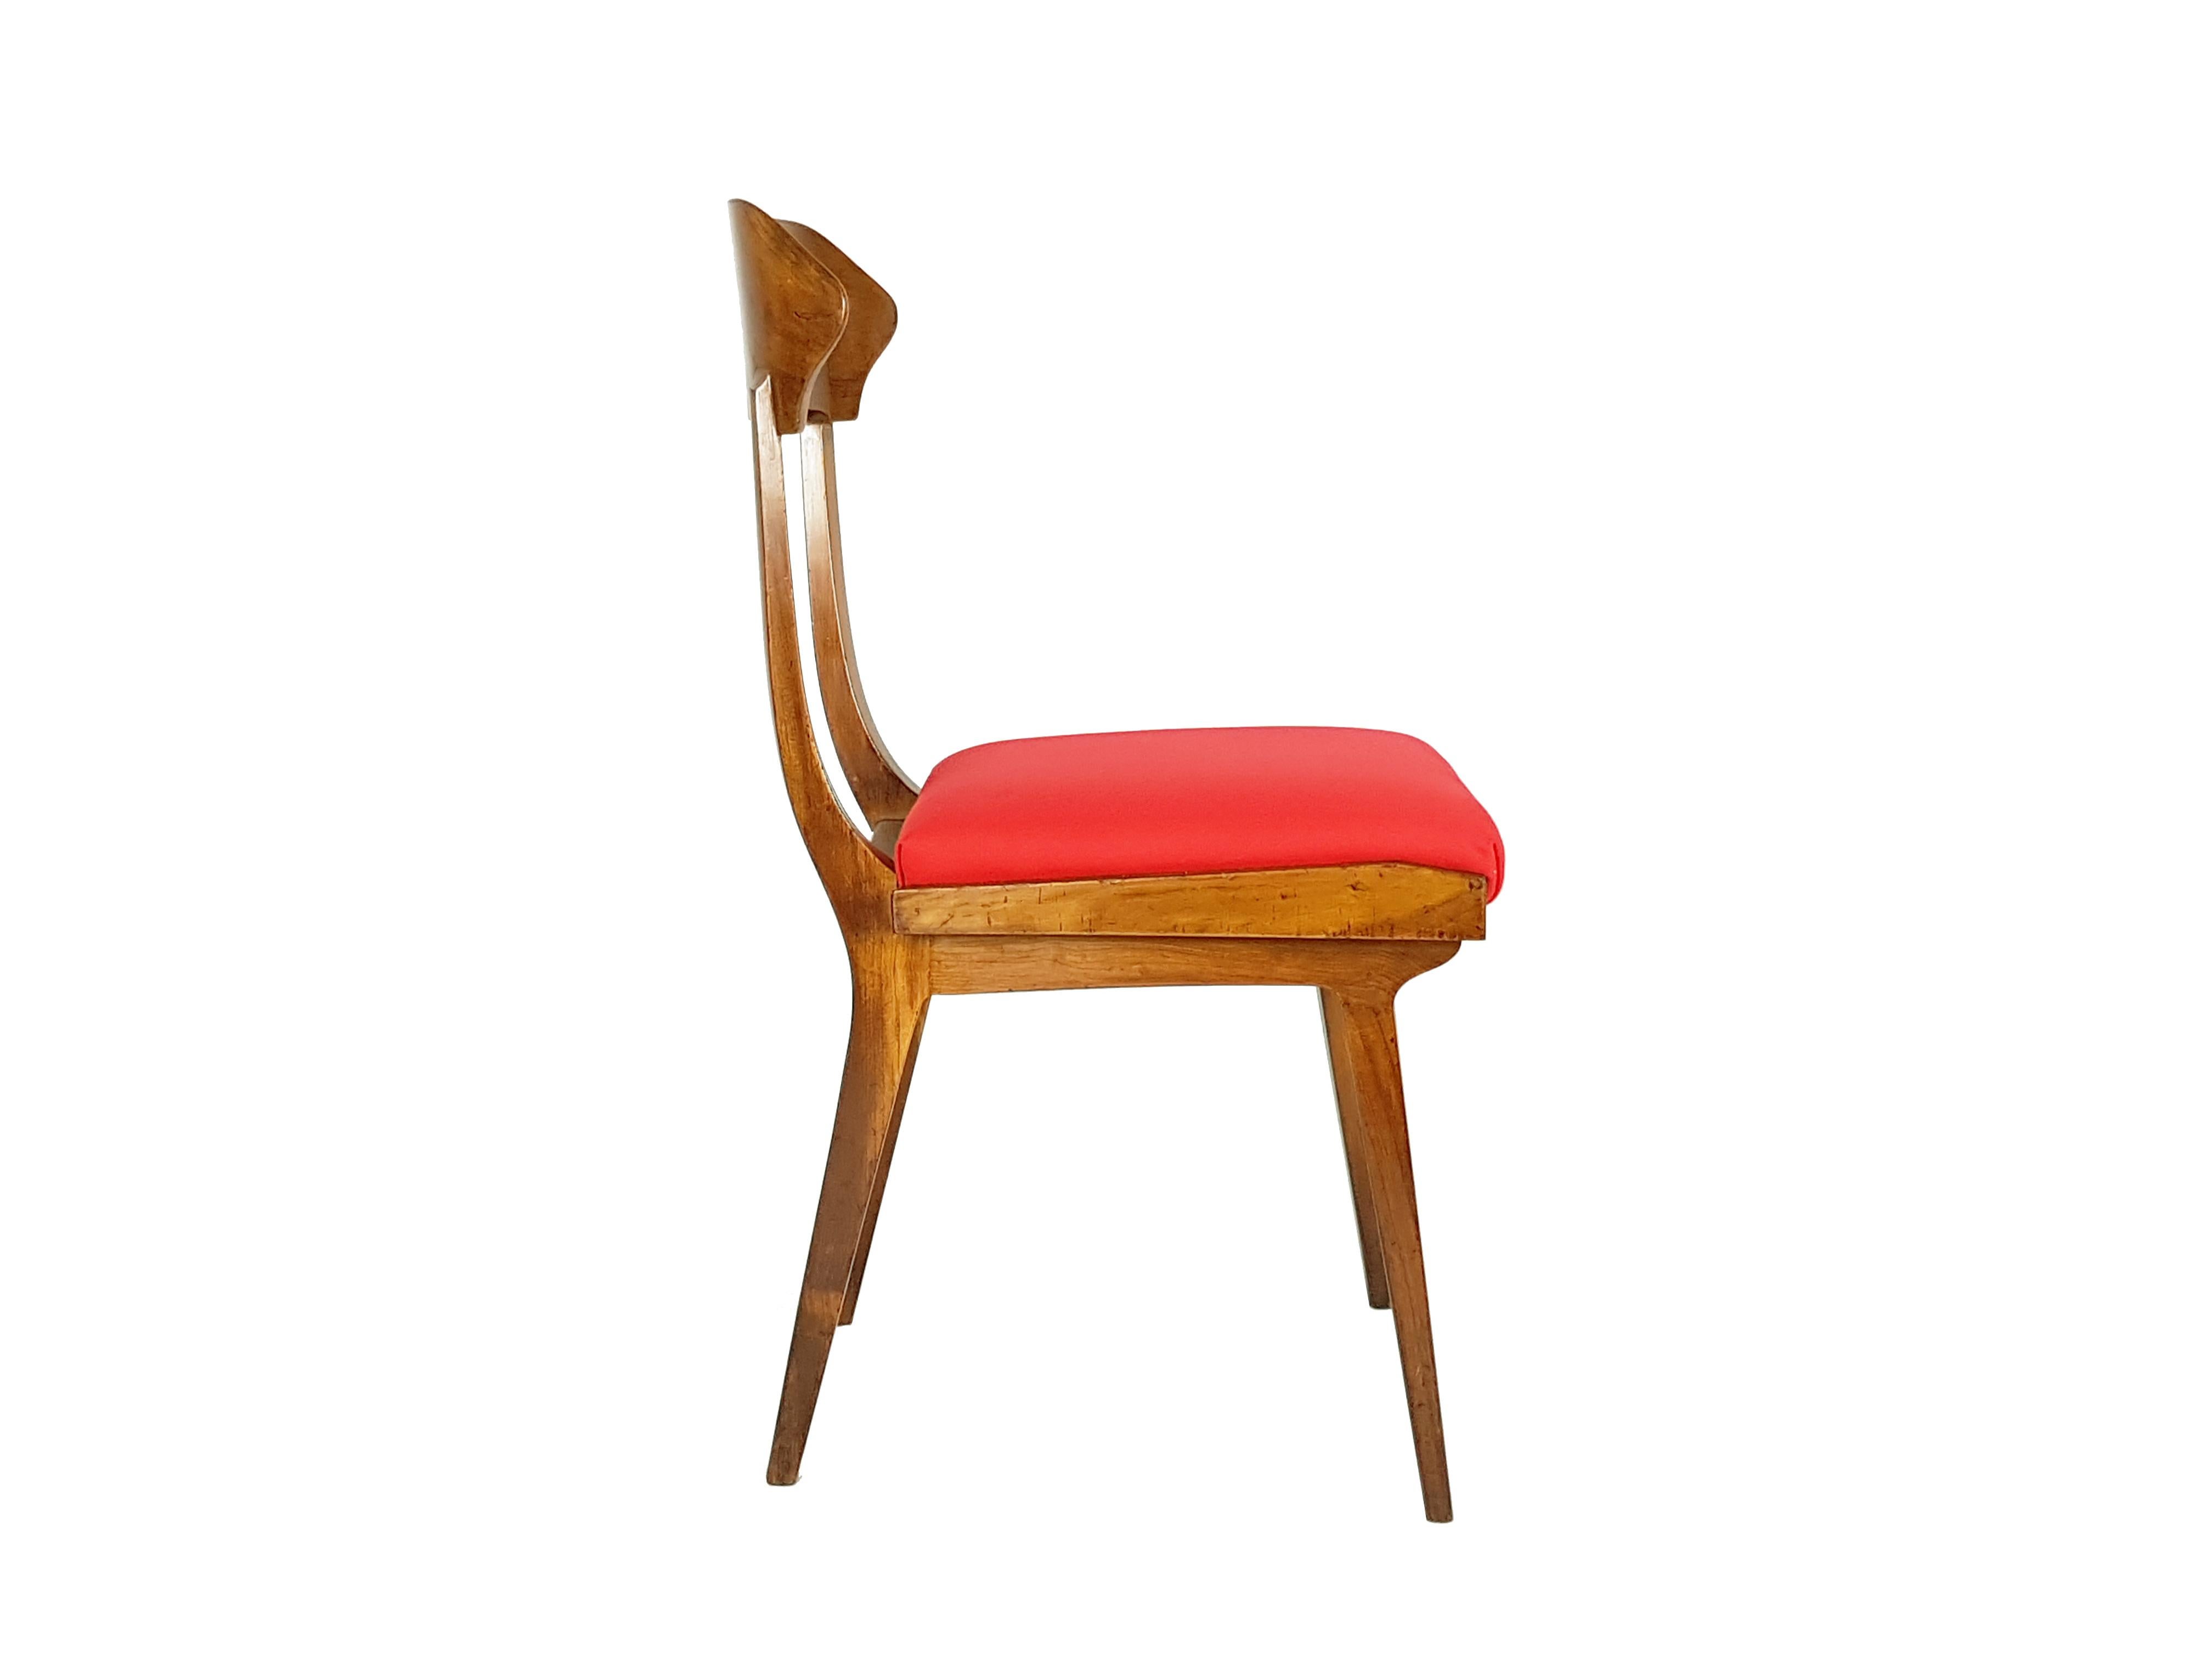 Midcentury Wood and Red Fabric Side Chairs from Fratelli Barni Mobili d'Arte For Sale 5